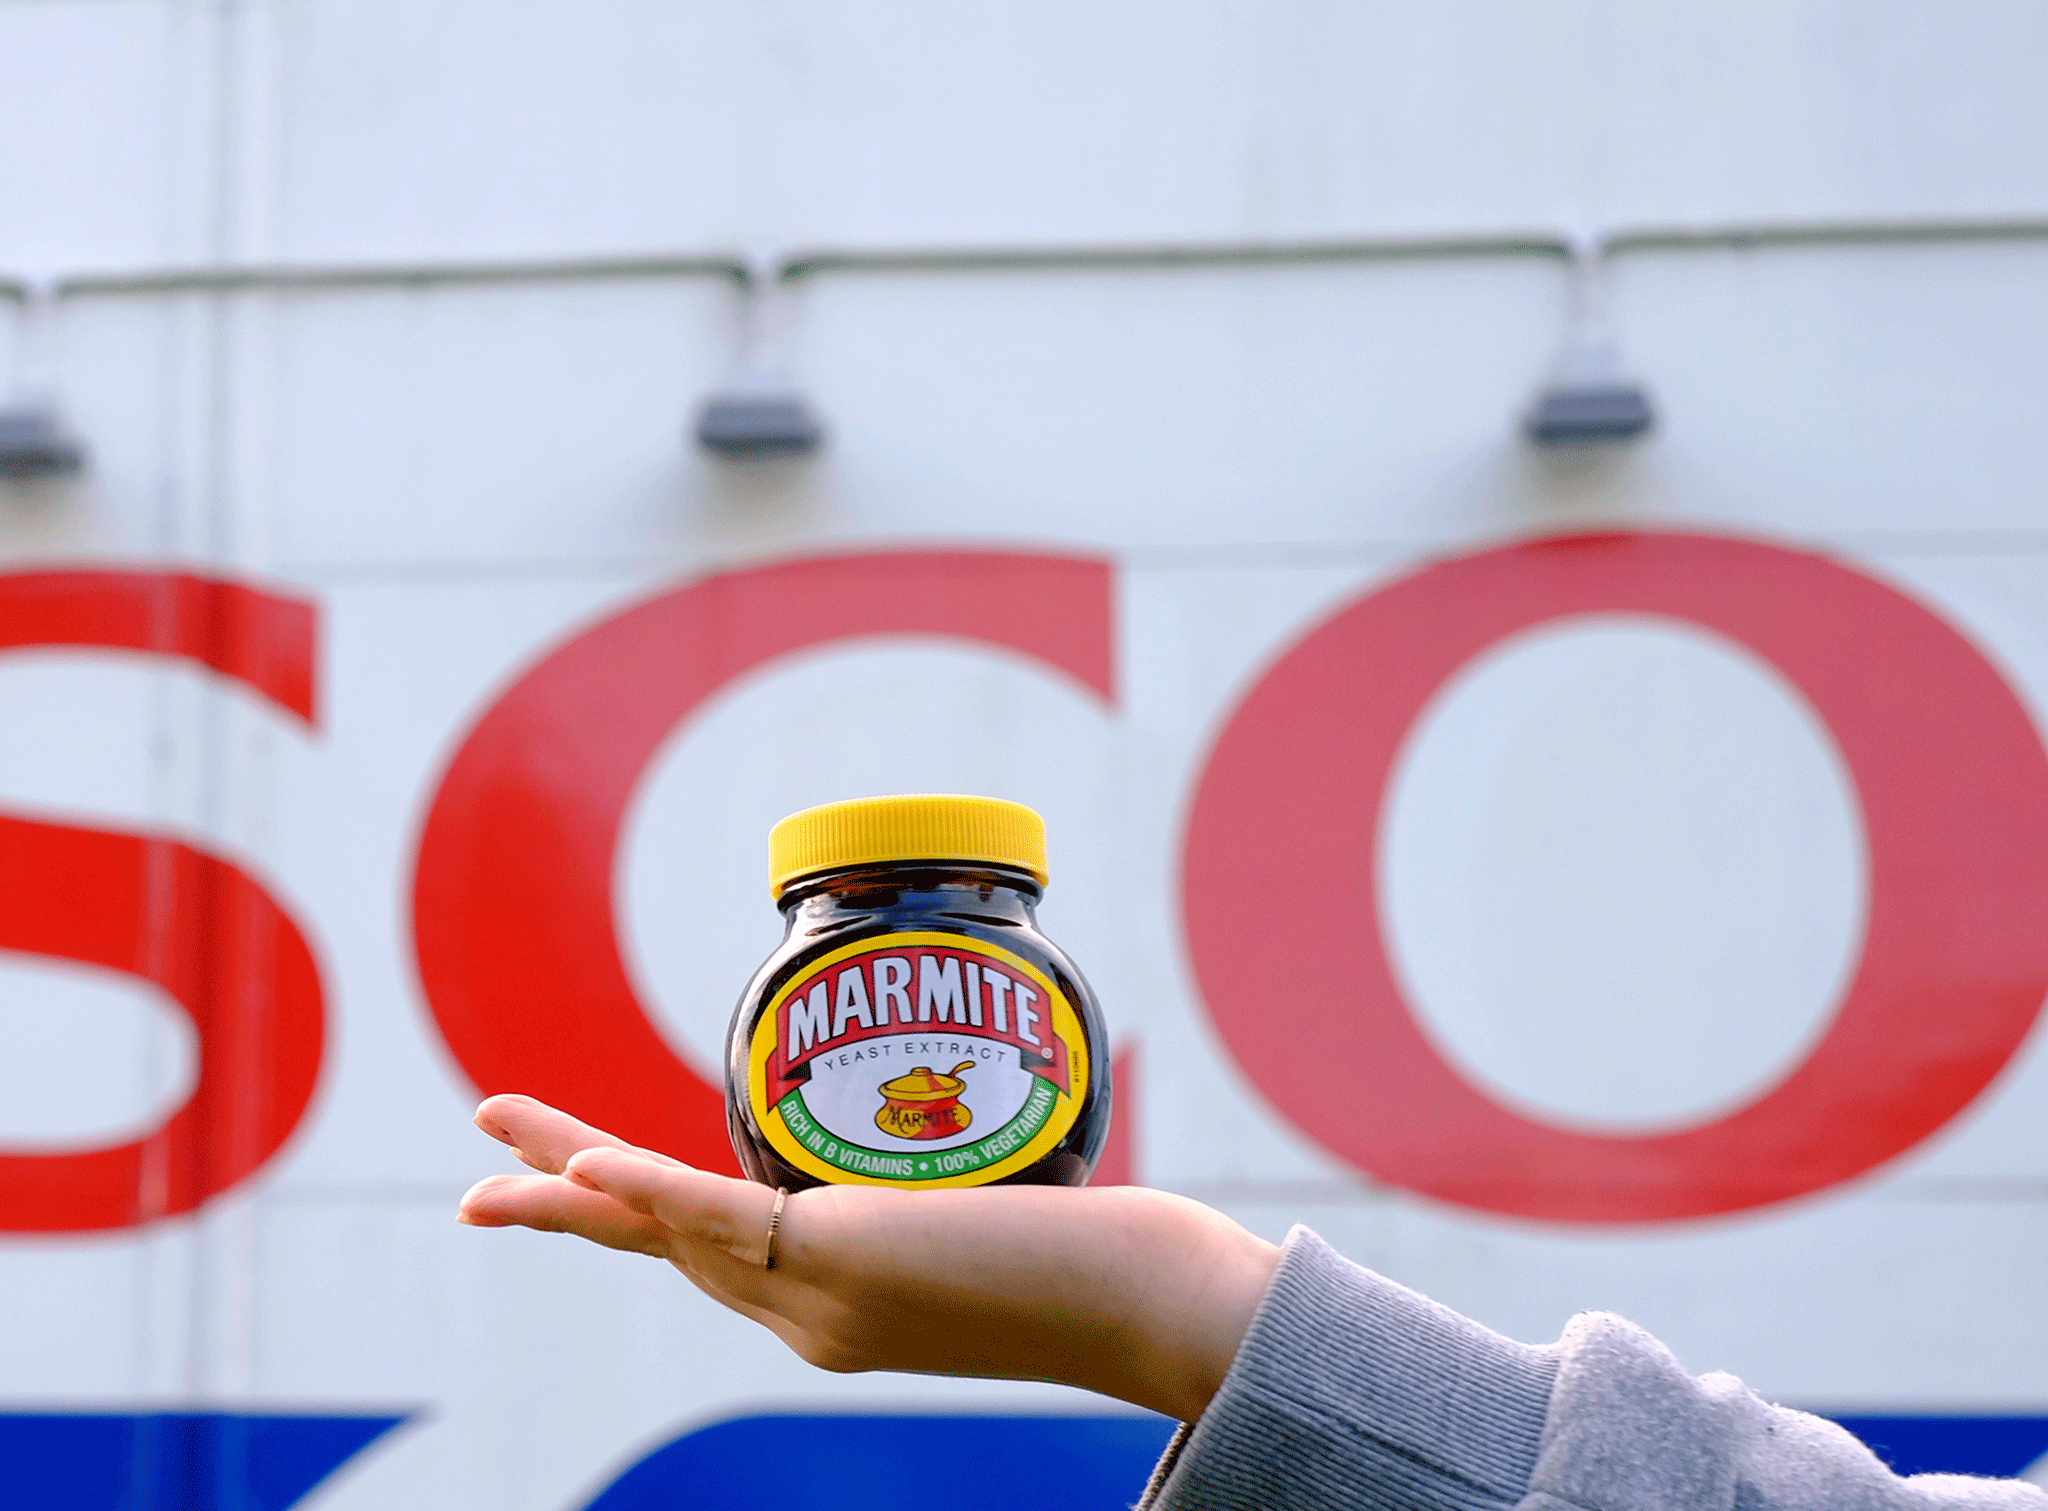 Unilever boss says Britons should 'get used to' price rises